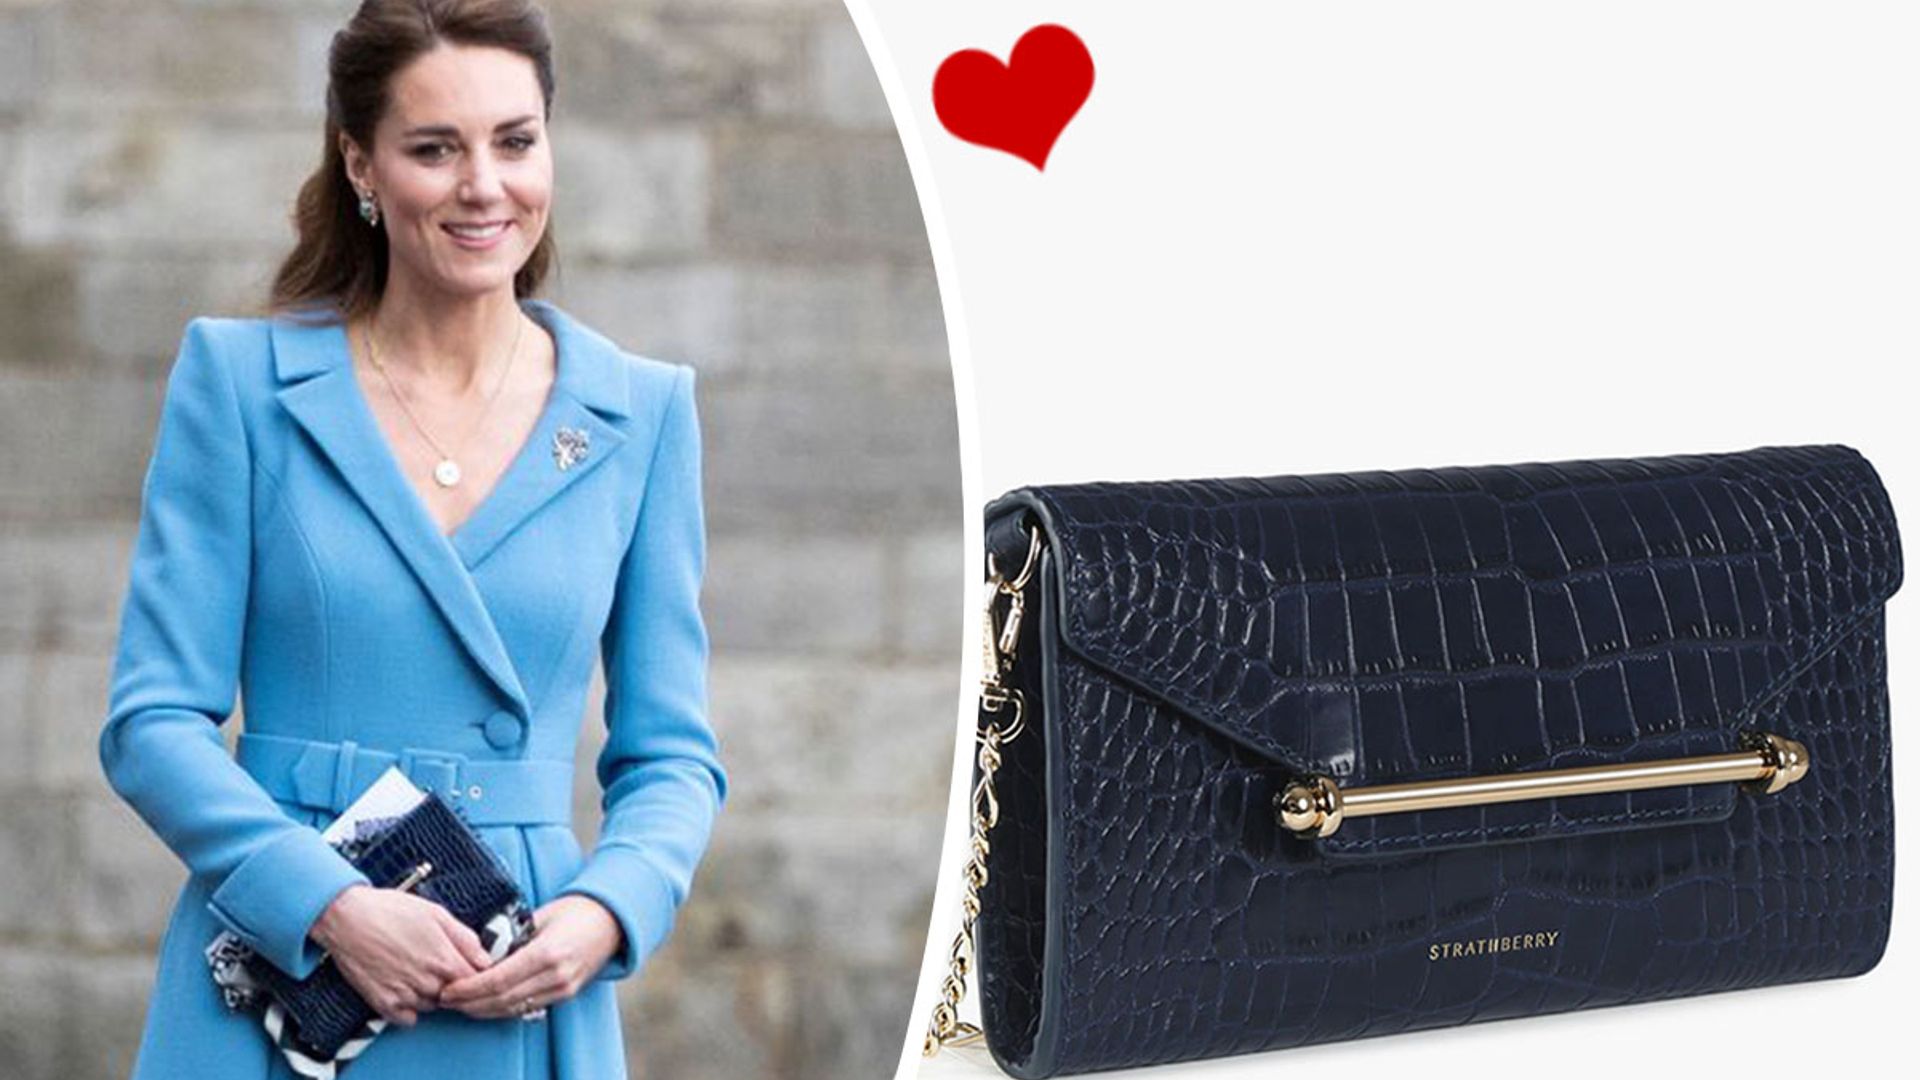 I Bought Kate Middleton's Strathberry Clutch!! Unboxing New Strathberry  Bag, a Royal Favorite Brand 